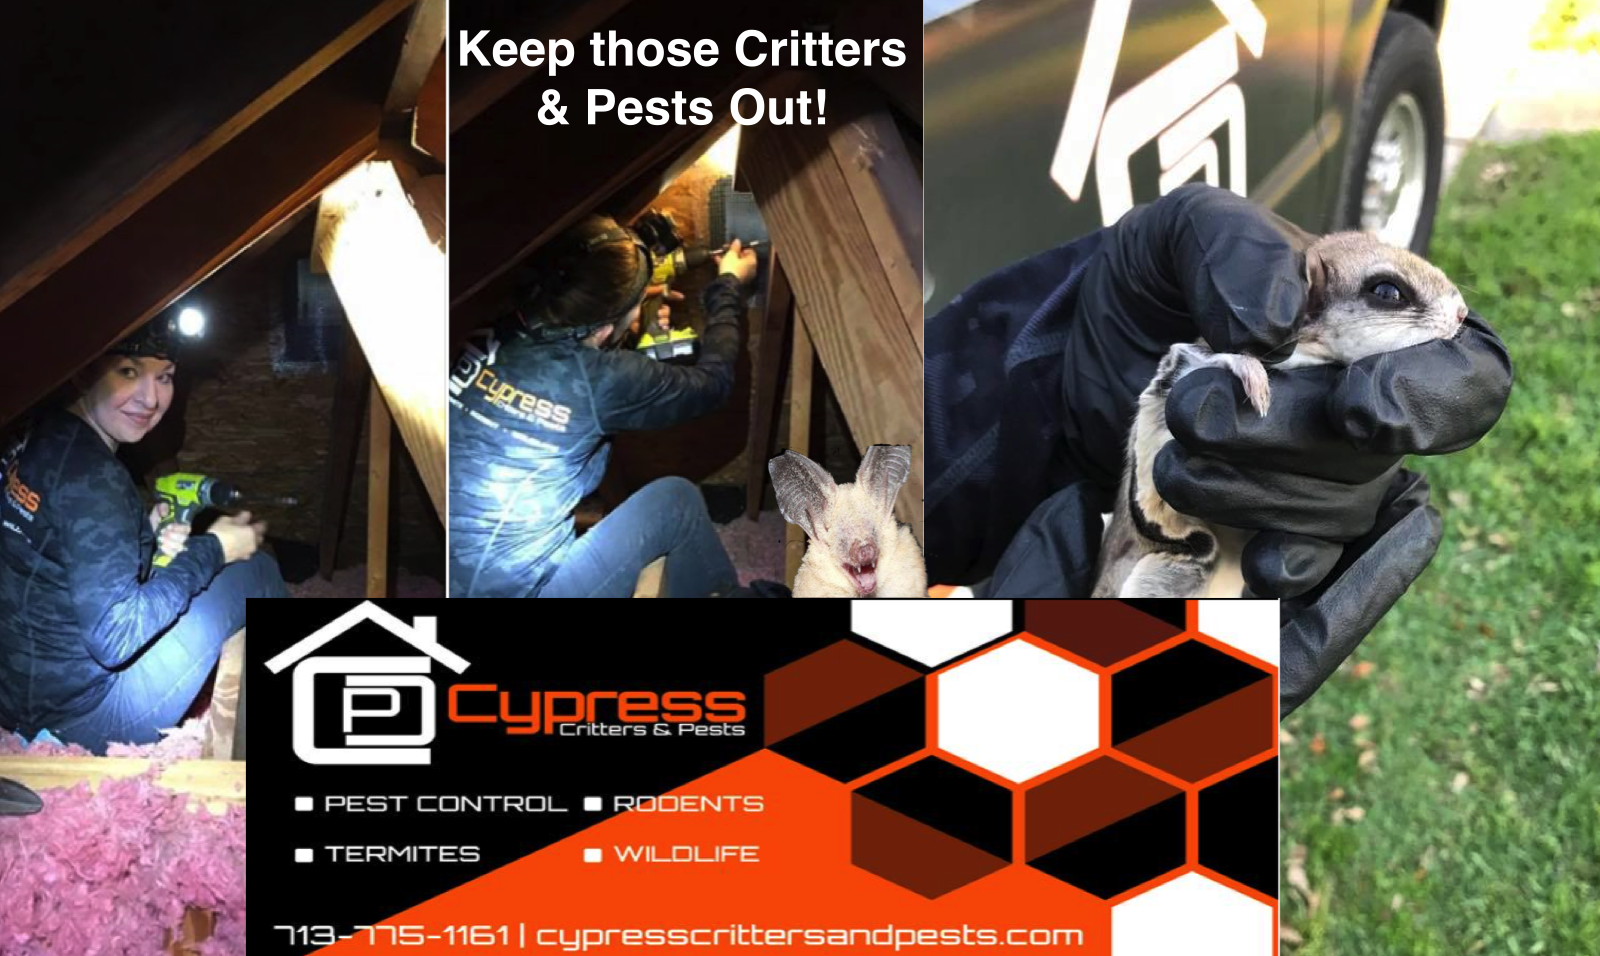 Keep those critters and pests out!